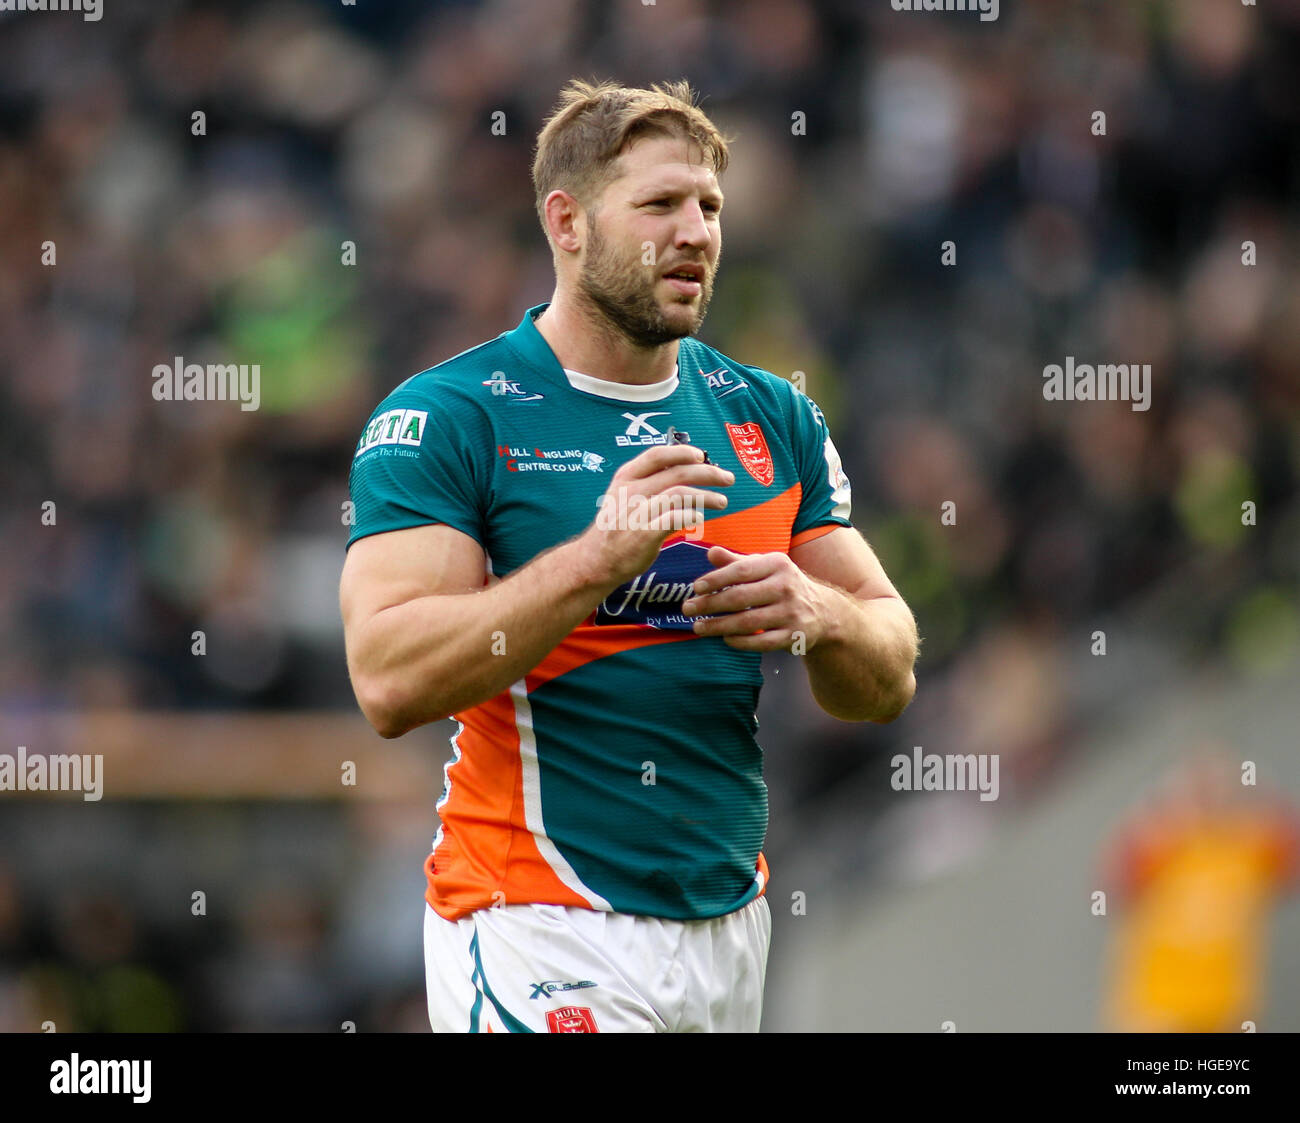 KCOM Stadium, Hull, UK. 8th Jan, 2017. Hull FC v Hull KR Clive Sullivan Trophy Pre- Season 2017 Friendly. Nick Scruton of Hull KR in action vs Hull FC Picture by © Stephen Gaunt/Touchlinepics.com/Alamy Live News Stock Photo